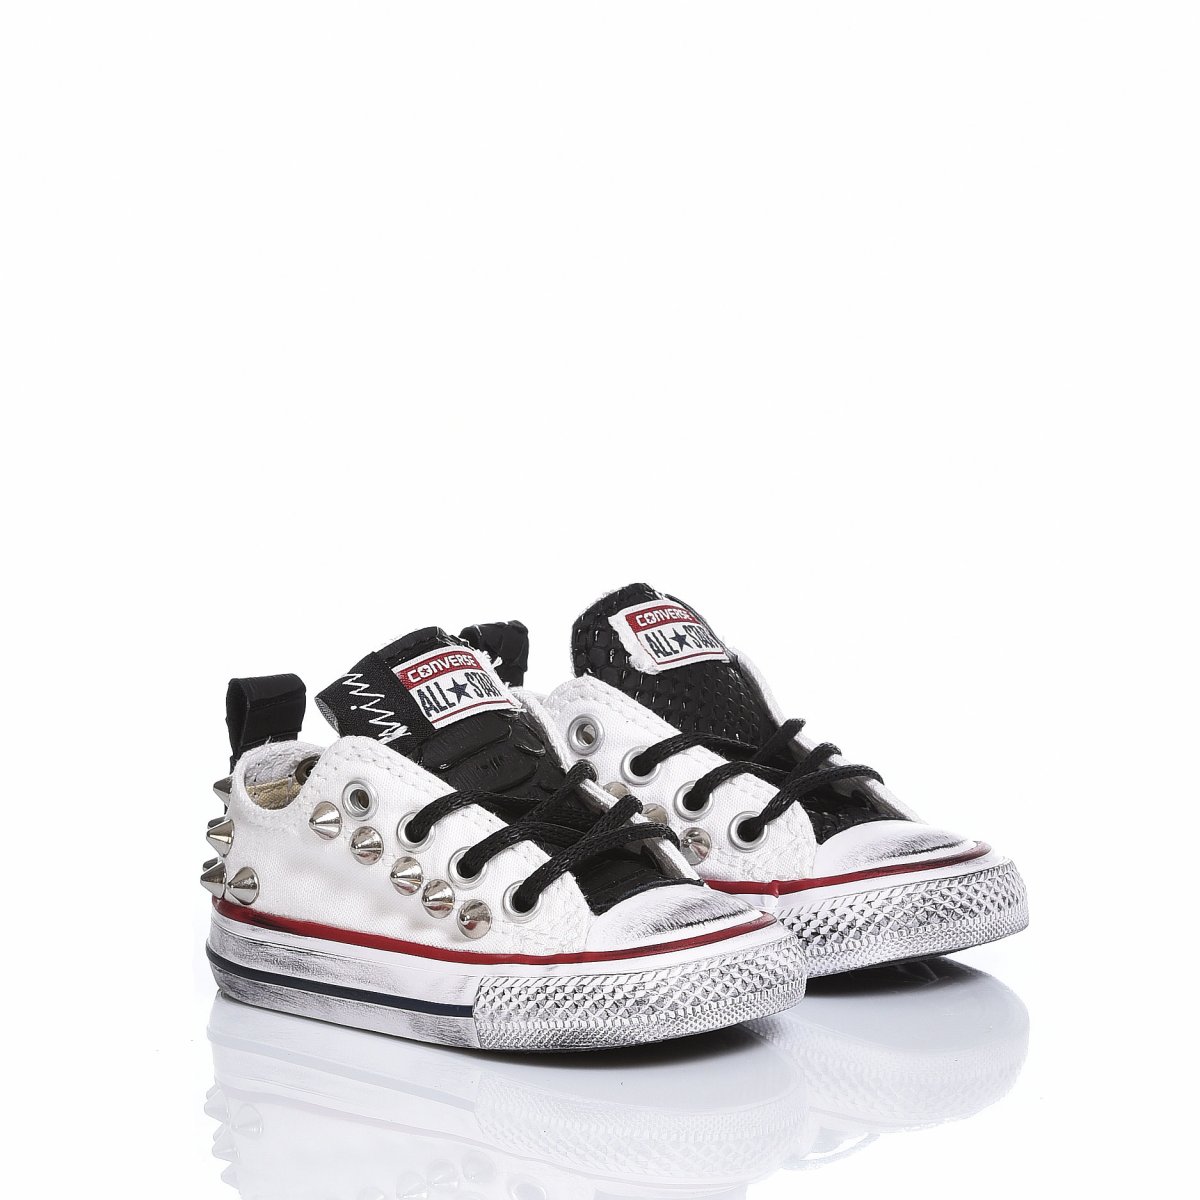 Converse Baby Black Spike Ox Chuck Taylor Ox Animalier, Borchie, Special